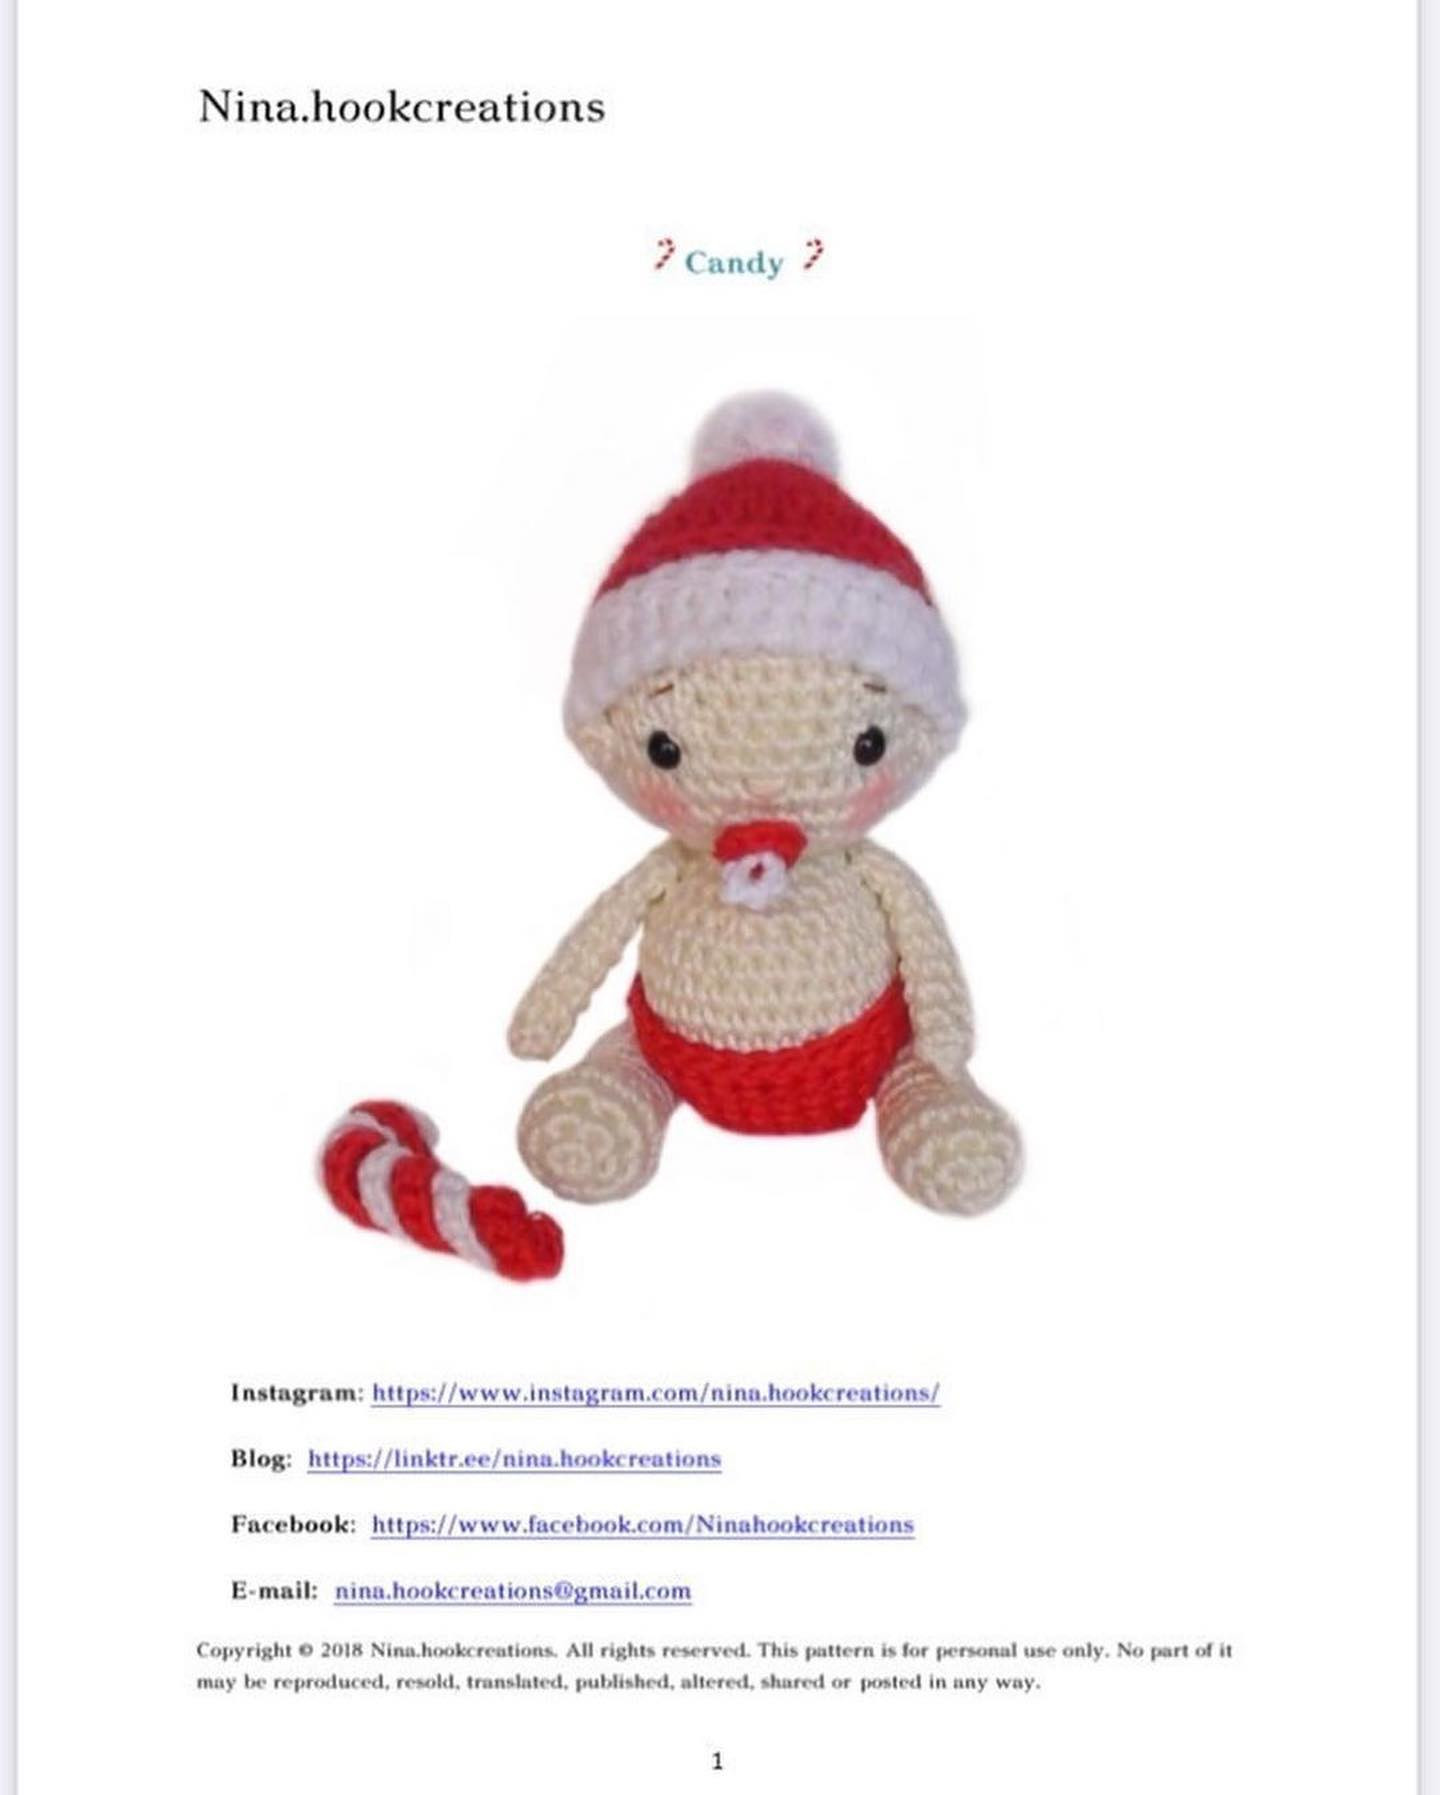 Crochet pattern for a baby holding a pacifier and wearing a red hat